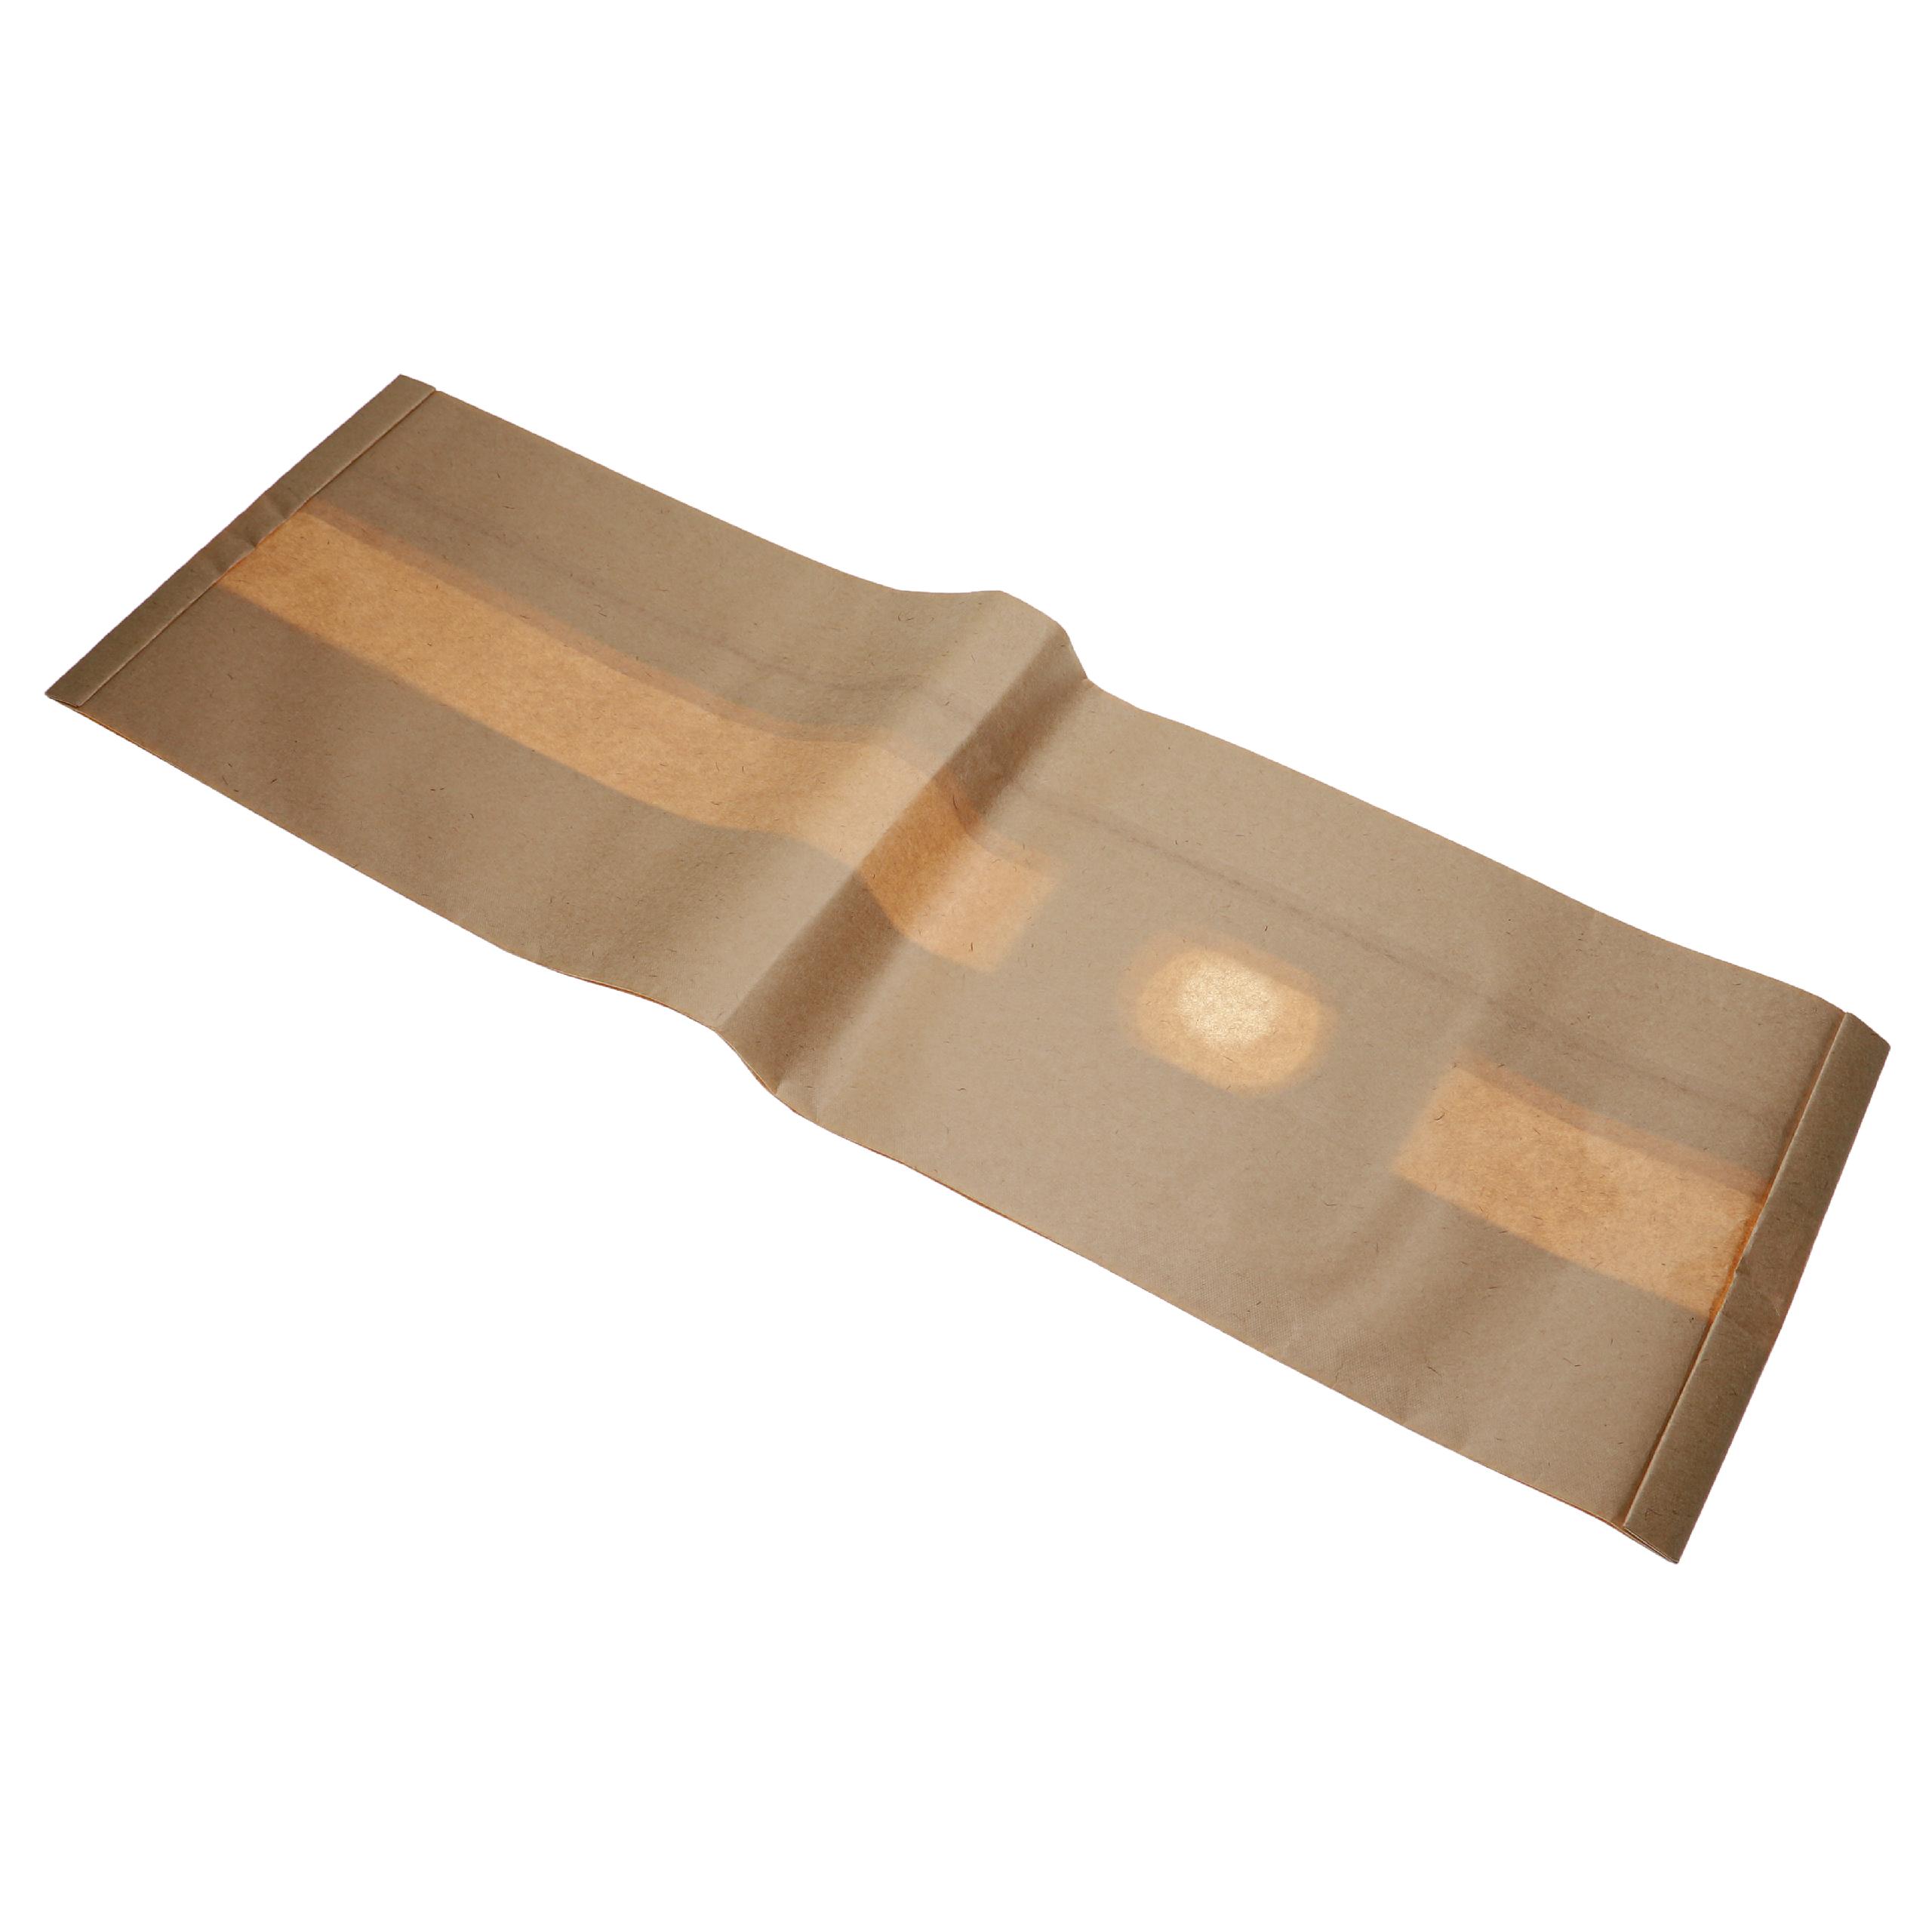 5x Vacuum Cleaner Bag replaces Nilfisk 56330690 for Nilfisk - paper